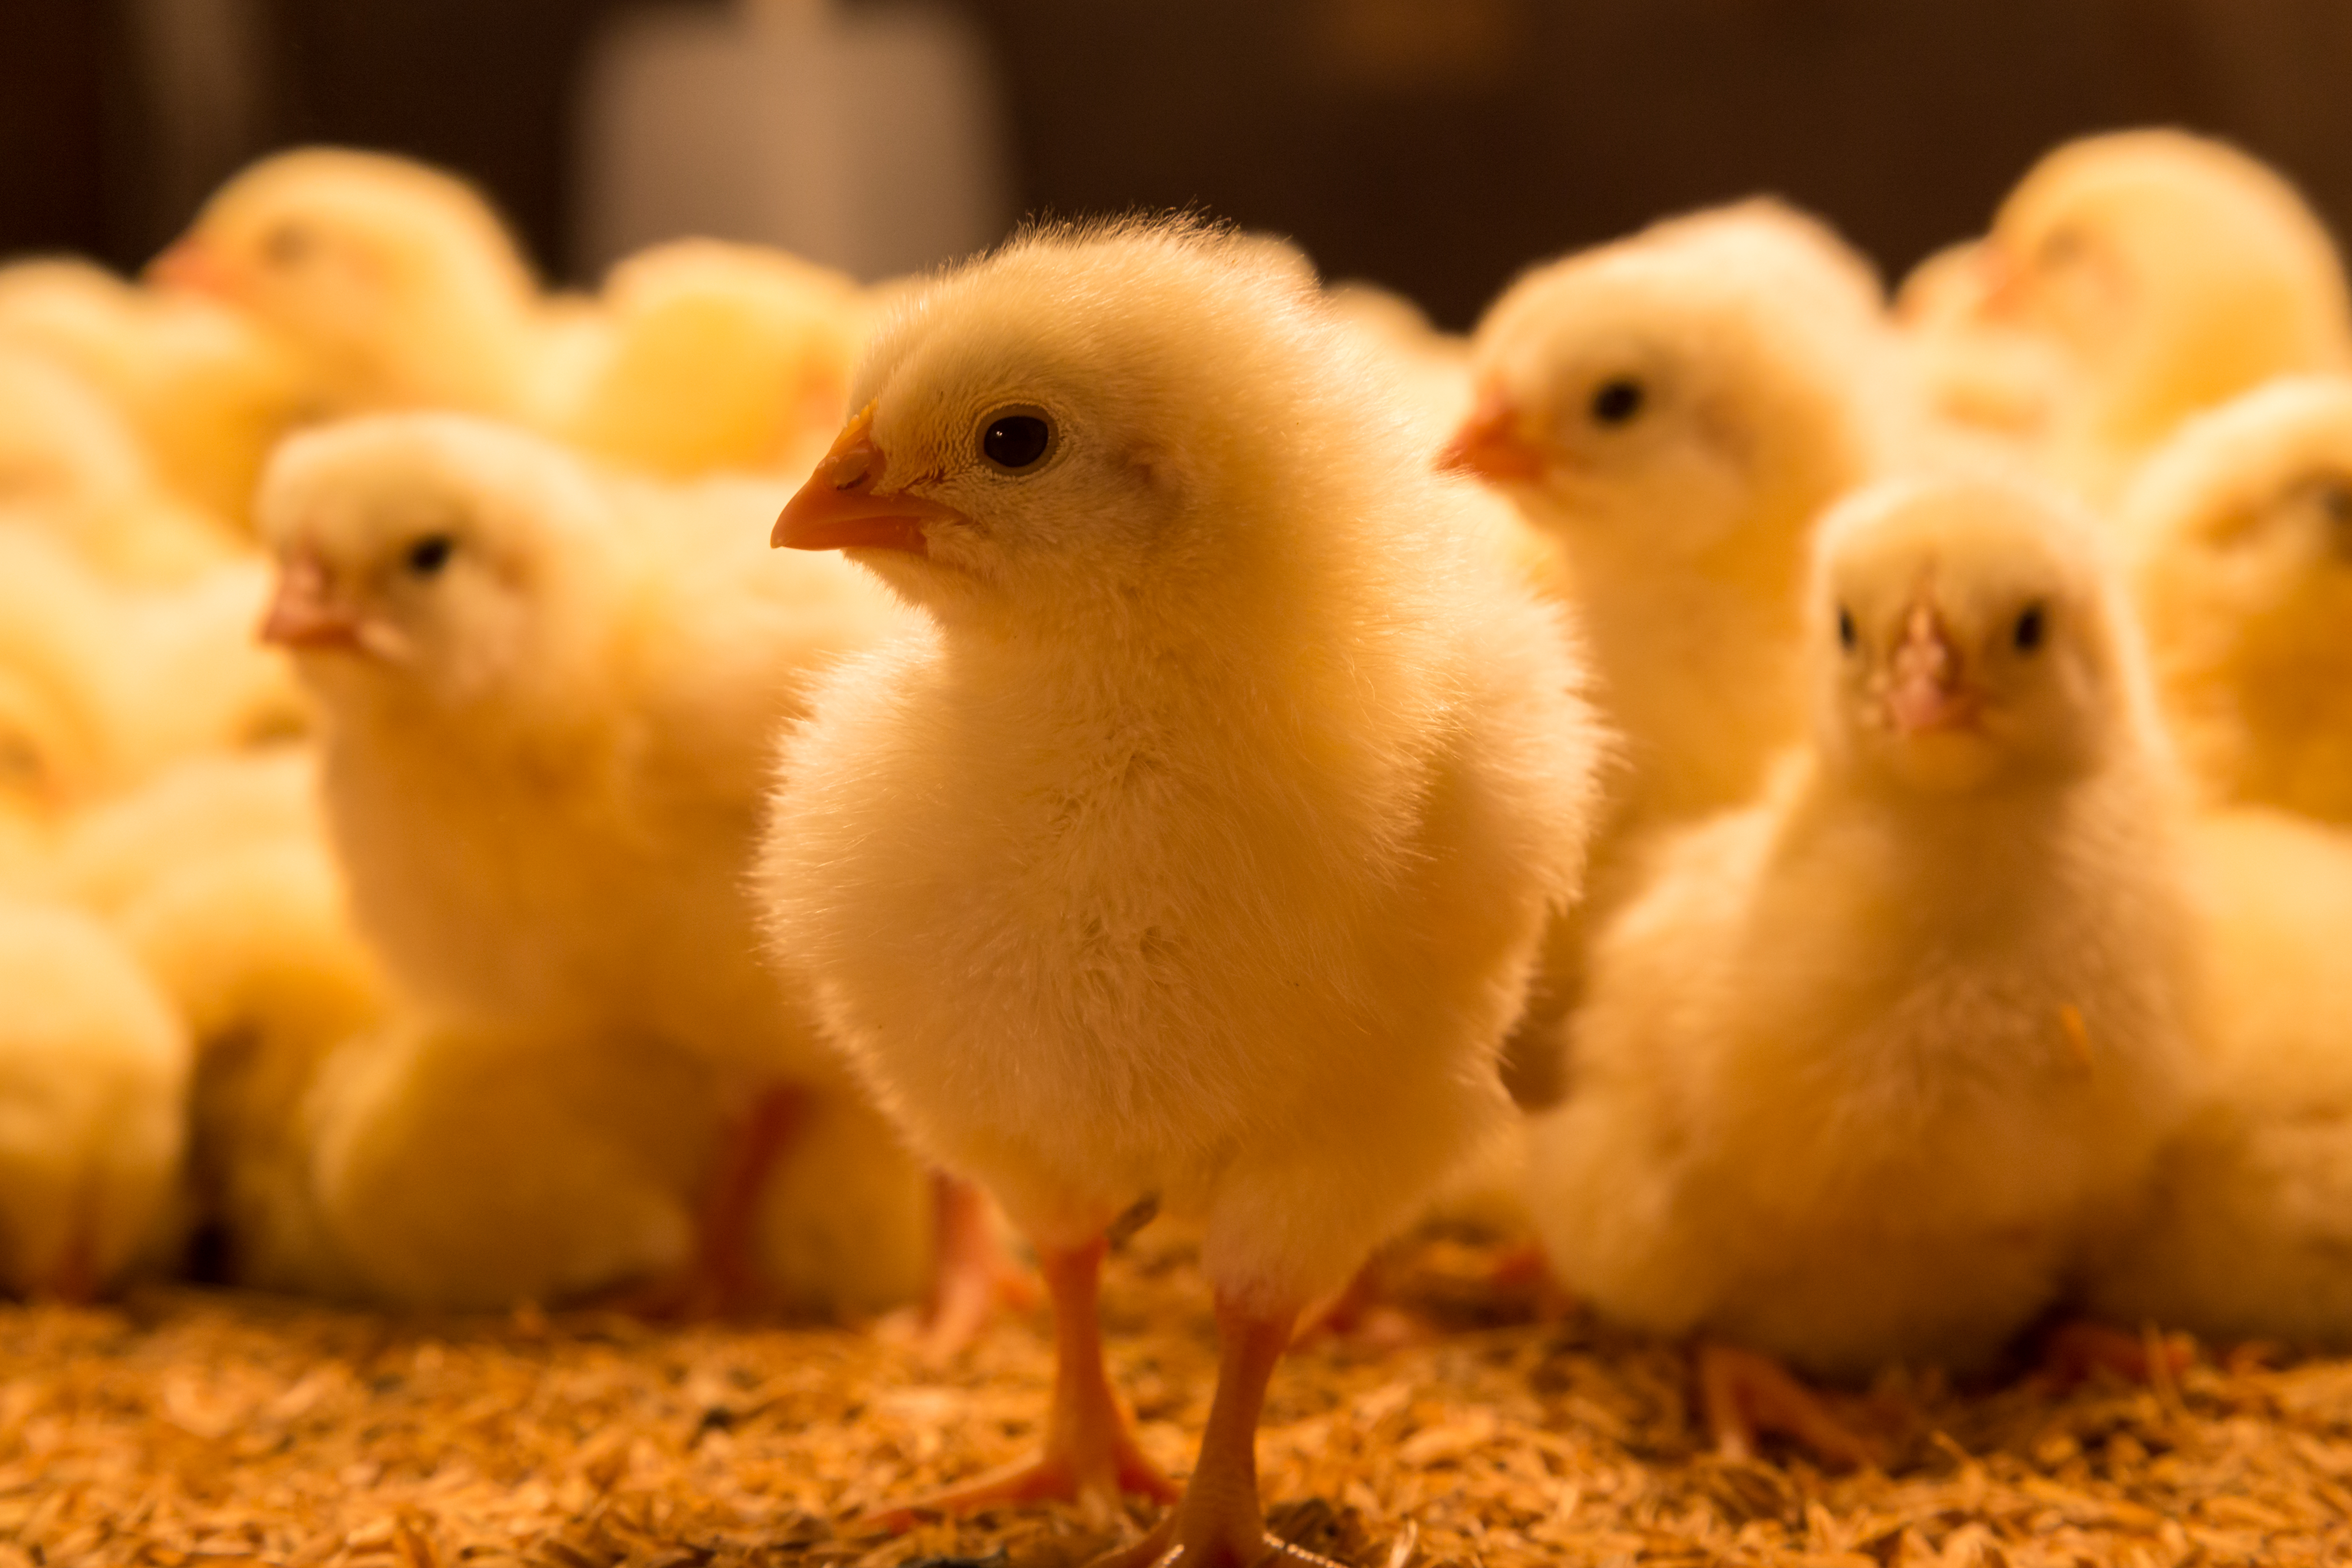 Poultry Management Software - Benefits of MAXIMUS Management Poultry Software